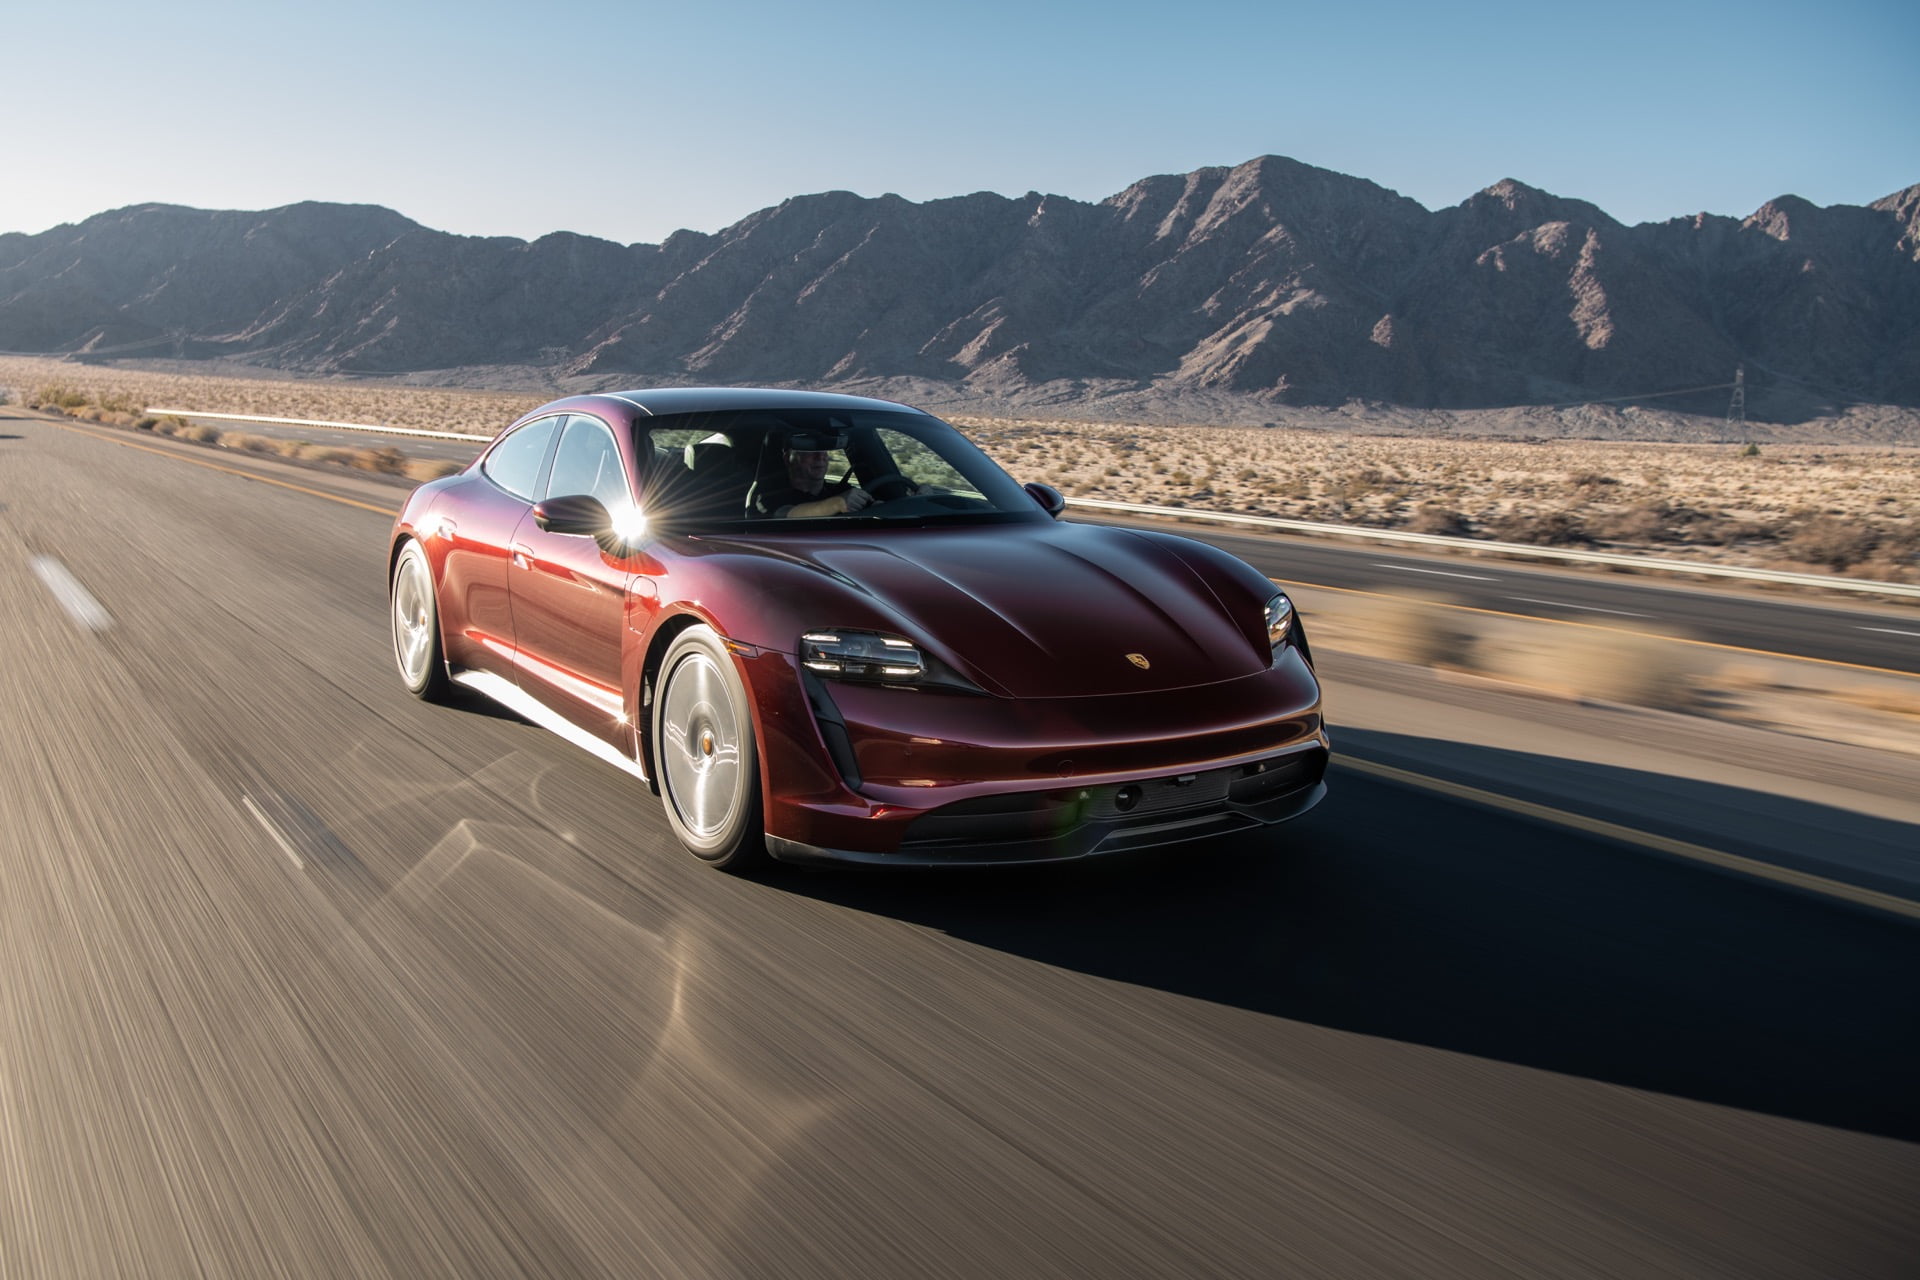 Porsche Taycan goes coast-to-coast with just 2.5 hours of charging